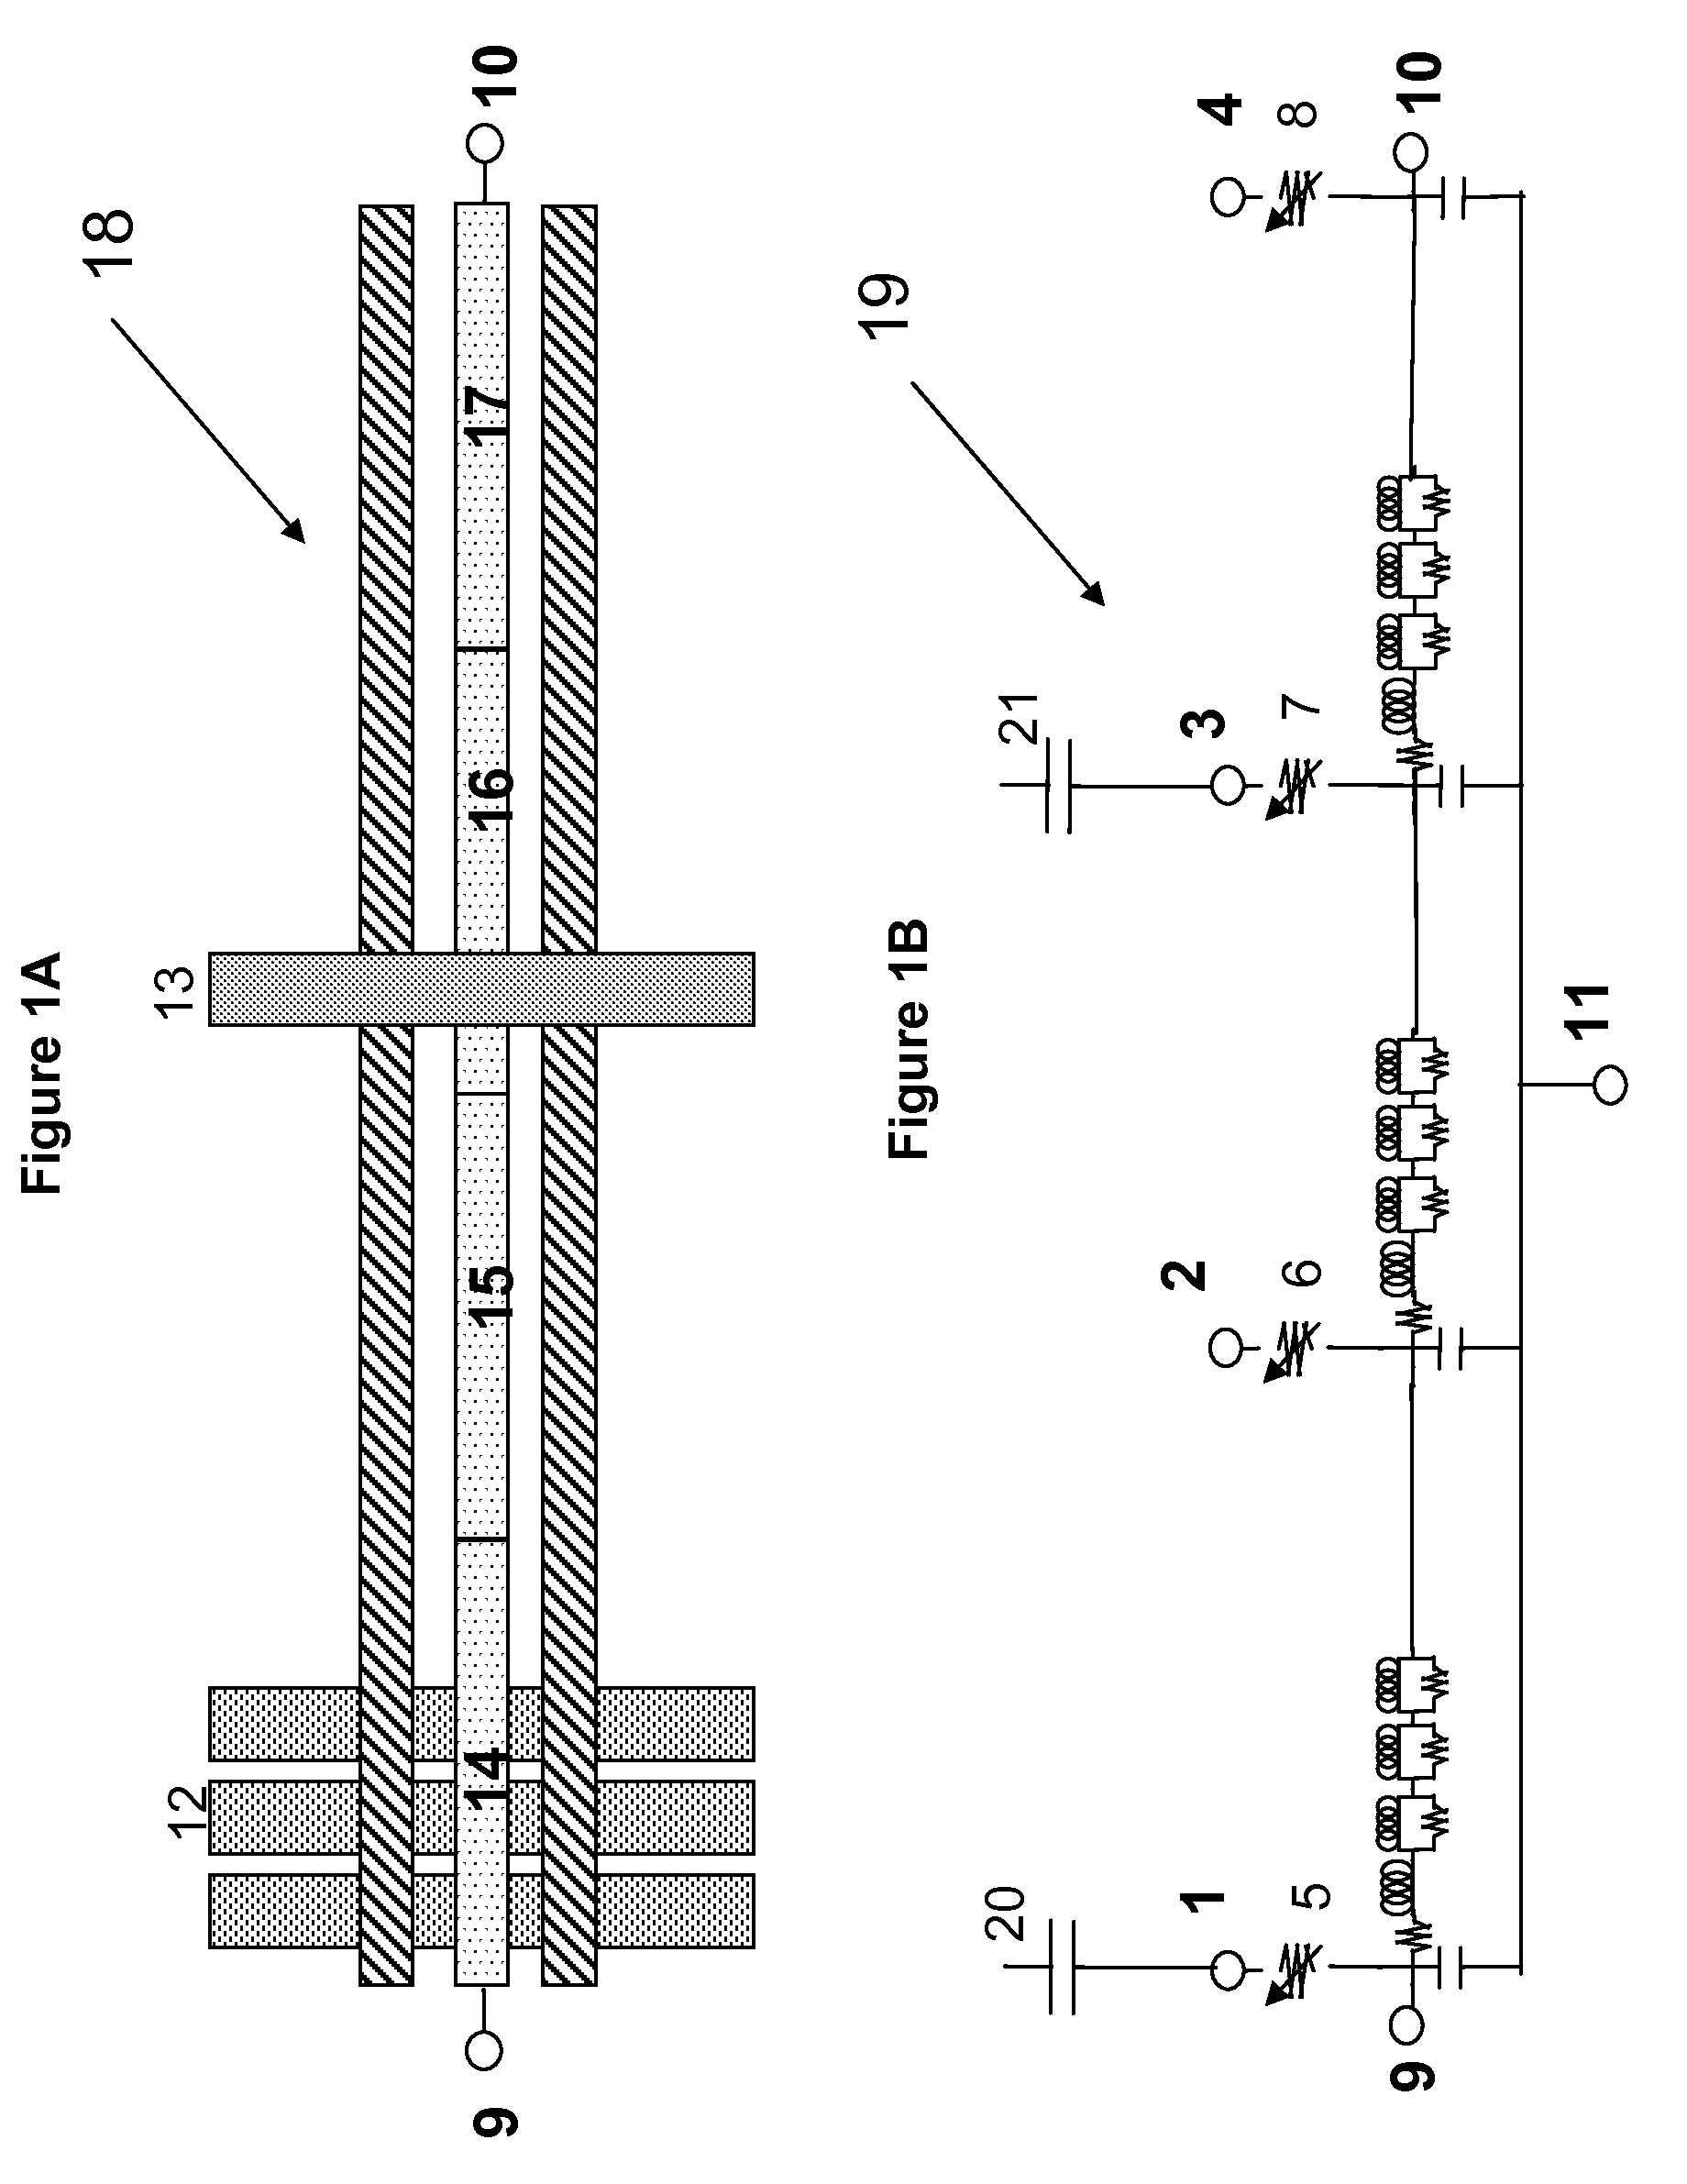 Method and System of Linking On-Chip Parasitic Coupling Capacitance Into Distributed Pre-Layout Passive Models